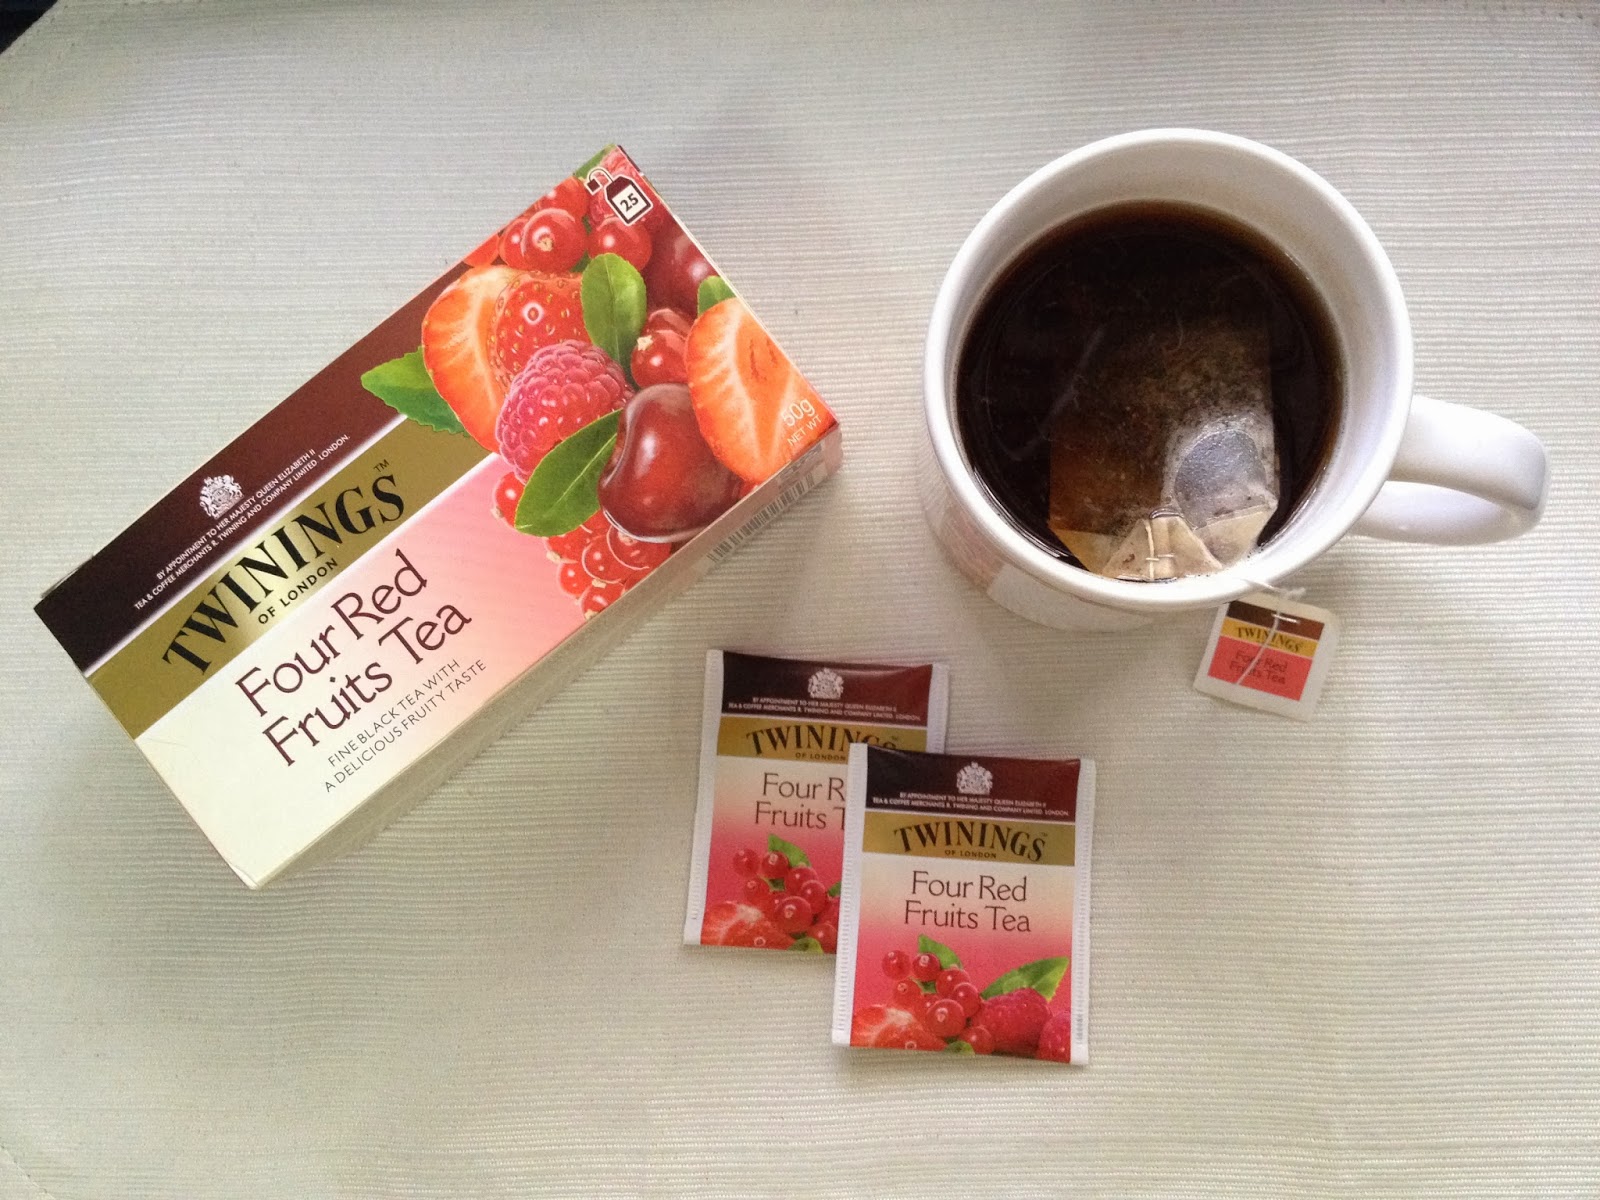 Yalung: of Twinings Four Red Fruits Tea